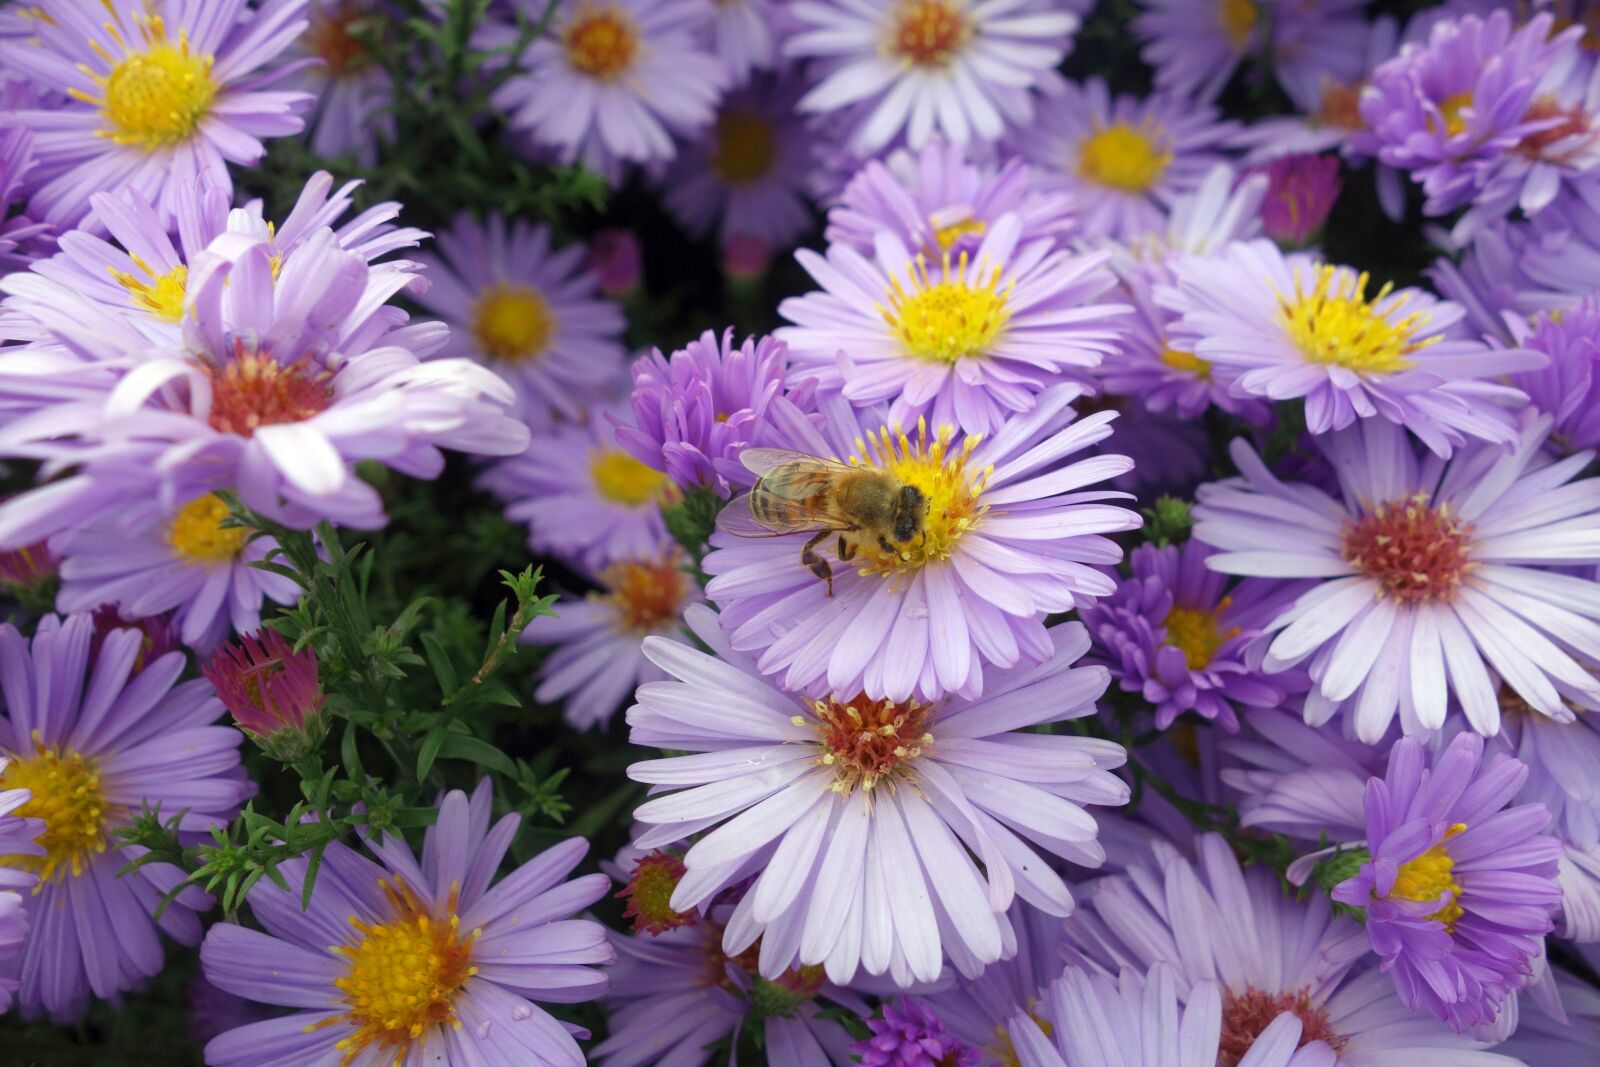 Sony Cyber-shot DSC-RX100 sample photo. Aster, bee, purple photography